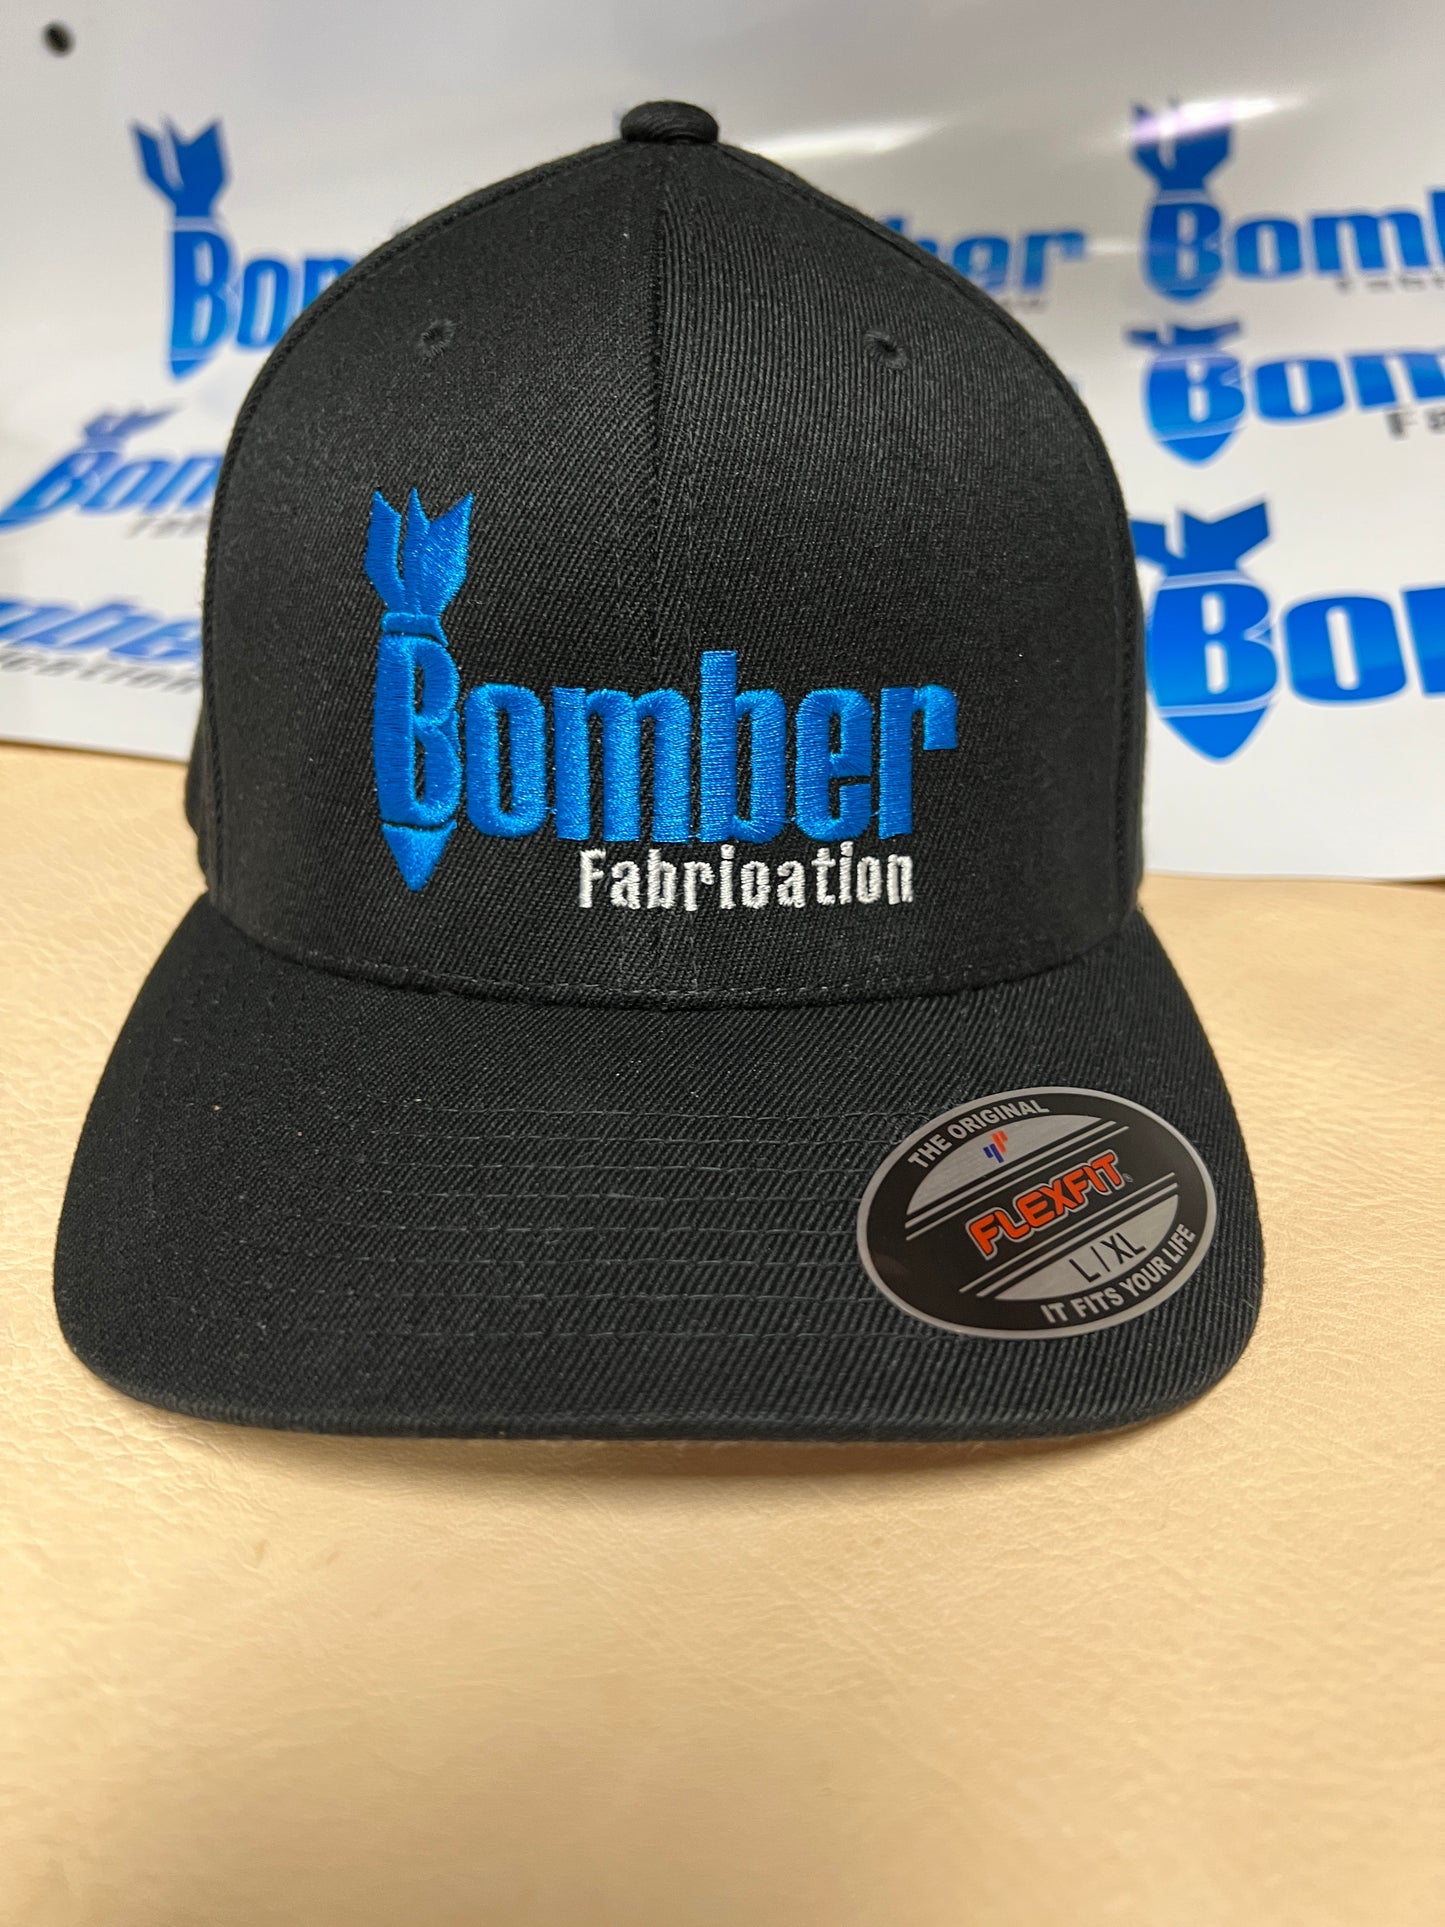 Bomber Fabrication Embroidered Flex Fit Hat